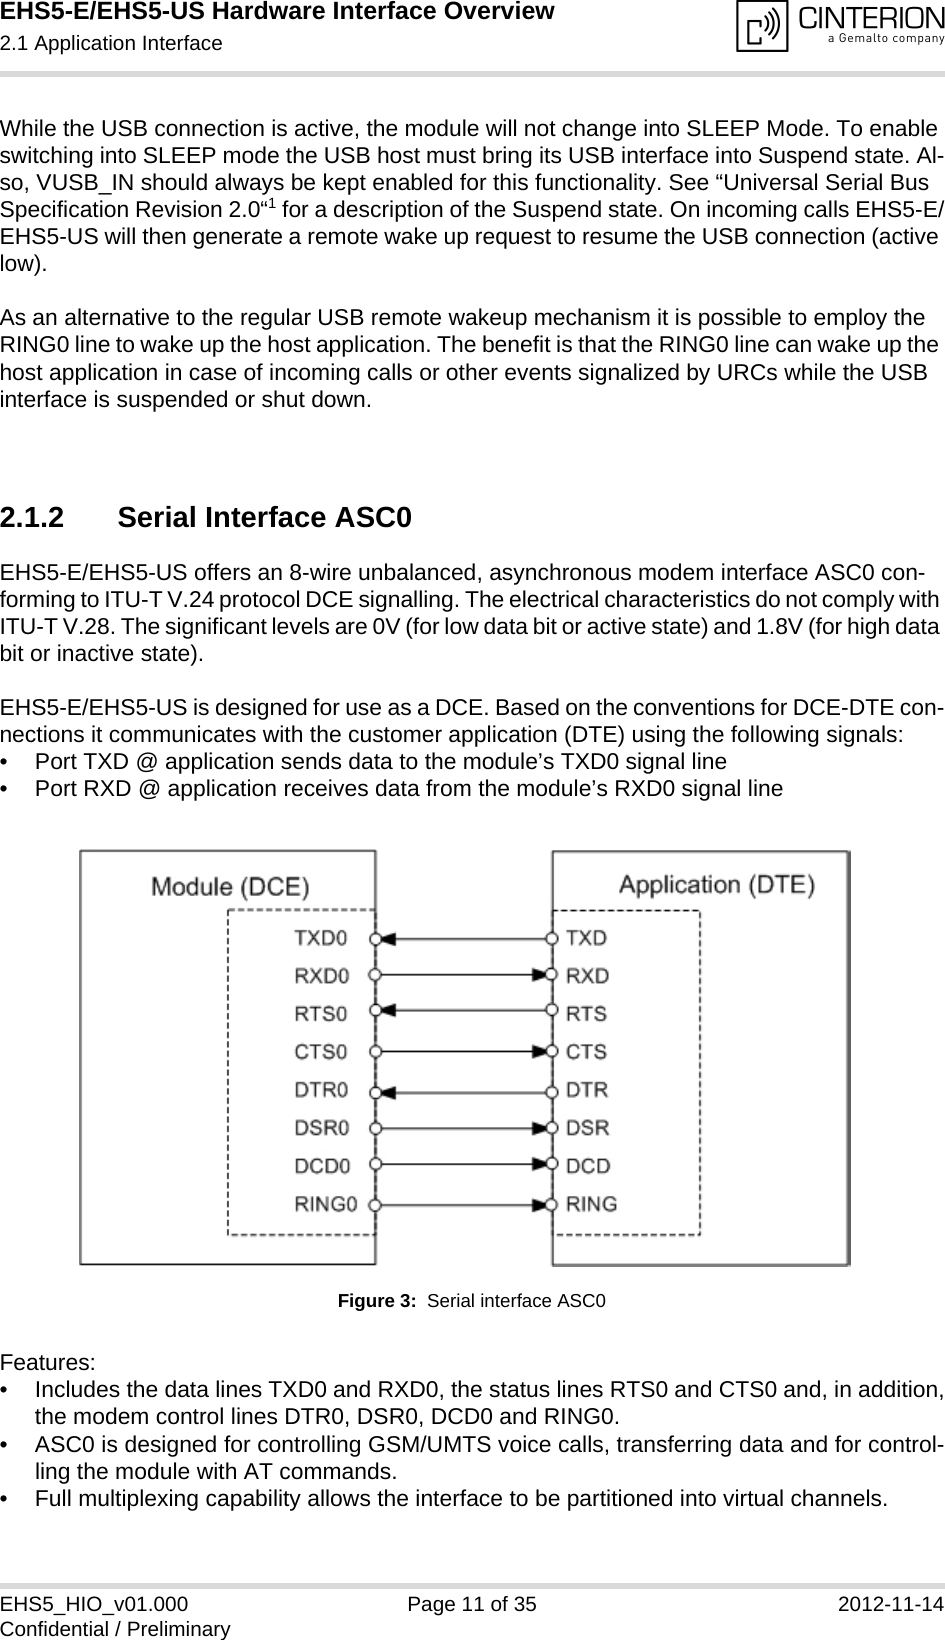 EHS5-E/EHS5-US Hardware Interface Overview2.1 Application Interface18EHS5_HIO_v01.000 Page 11 of 35 2012-11-14Confidential / PreliminaryWhile the USB connection is active, the module will not change into SLEEP Mode. To enable switching into SLEEP mode the USB host must bring its USB interface into Suspend state. Al-so, VUSB_IN should always be kept enabled for this functionality. See “Universal Serial Bus Specification Revision 2.0“1 for a description of the Suspend state. On incoming calls EHS5-E/EHS5-US will then generate a remote wake up request to resume the USB connection (active low).As an alternative to the regular USB remote wakeup mechanism it is possible to employ the RING0 line to wake up the host application. The benefit is that the RING0 line can wake up the host application in case of incoming calls or other events signalized by URCs while the USB interface is suspended or shut down. 2.1.2 Serial Interface ASC0EHS5-E/EHS5-US offers an 8-wire unbalanced, asynchronous modem interface ASC0 con-forming to ITU-T V.24 protocol DCE signalling. The electrical characteristics do not comply with ITU-T V.28. The significant levels are 0V (for low data bit or active state) and 1.8V (for high data bit or inactive state). EHS5-E/EHS5-US is designed for use as a DCE. Based on the conventions for DCE-DTE con-nections it communicates with the customer application (DTE) using the following signals:• Port TXD @ application sends data to the module’s TXD0 signal line• Port RXD @ application receives data from the module’s RXD0 signal lineFigure 3:  Serial interface ASC0Features:• Includes the data lines TXD0 and RXD0, the status lines RTS0 and CTS0 and, in addition,the modem control lines DTR0, DSR0, DCD0 and RING0.• ASC0 is designed for controlling GSM/UMTS voice calls, transferring data and for control-ling the module with AT commands.• Full multiplexing capability allows the interface to be partitioned into virtual channels.